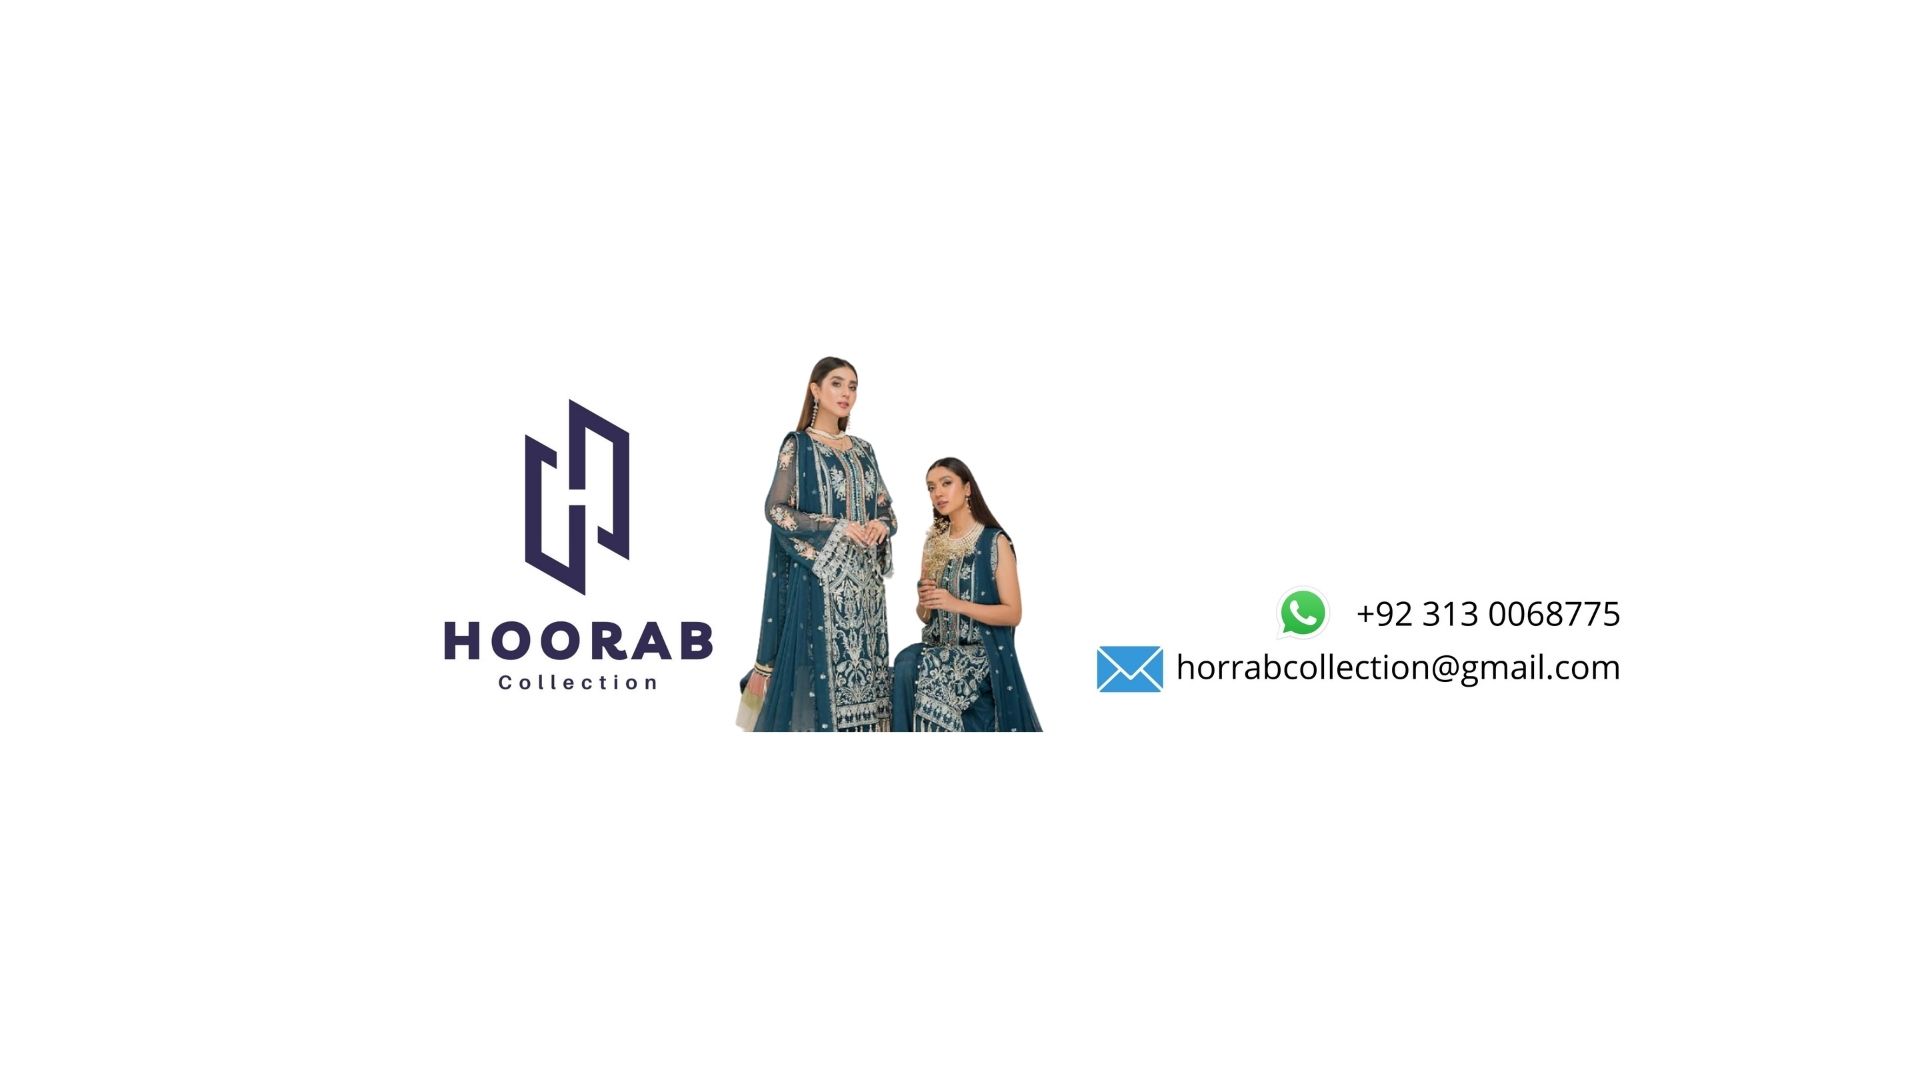 Hoorab Collection